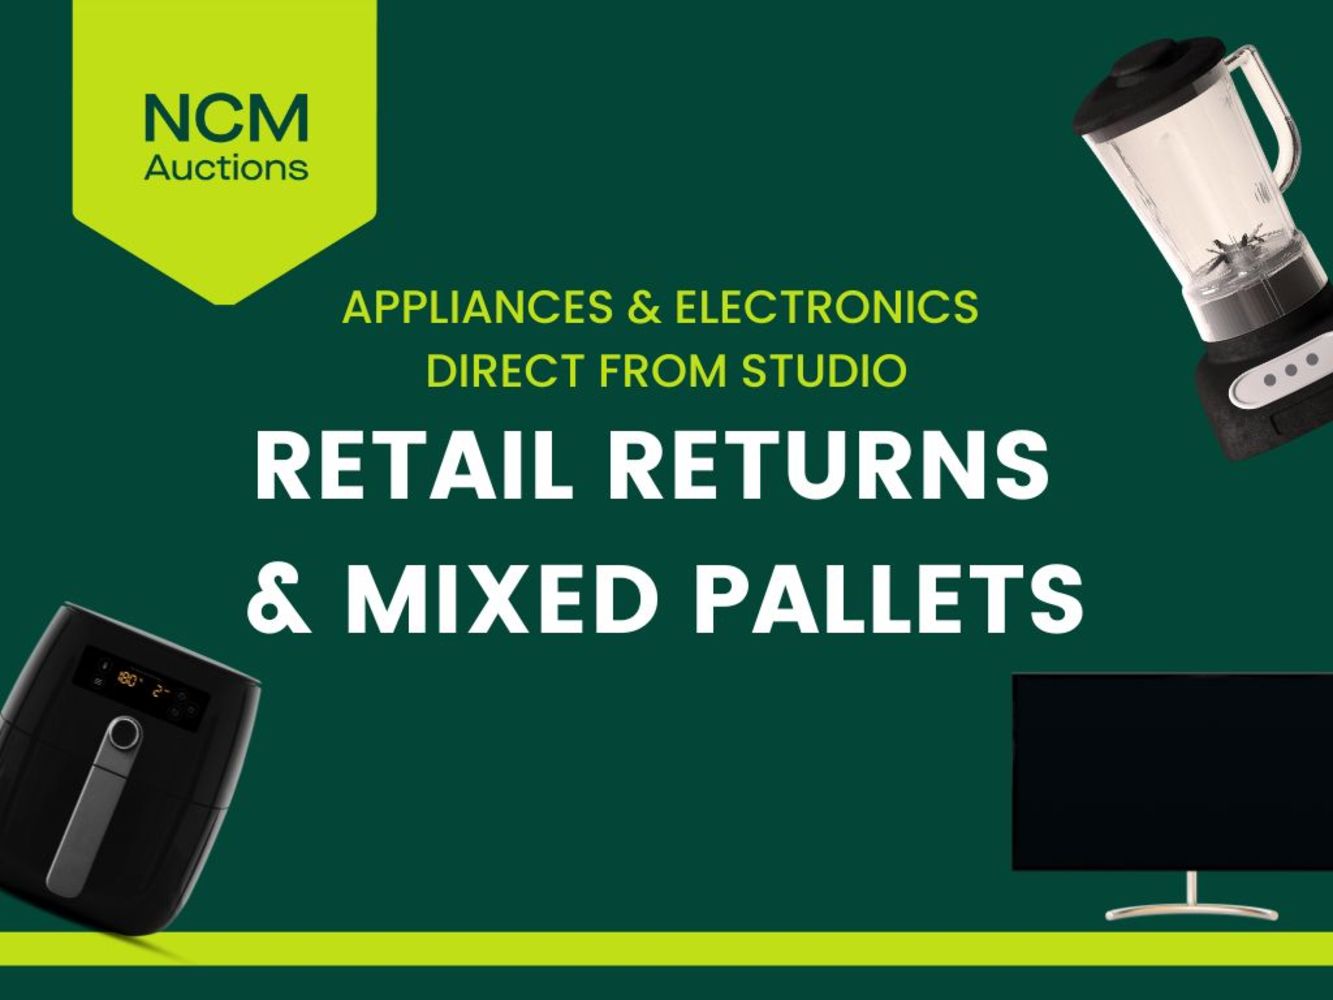 Retail Returns & Mixed Trade Pallets Direct From Online Retailer *NO RESERVE* Branded Products Up To 90% Off RRP